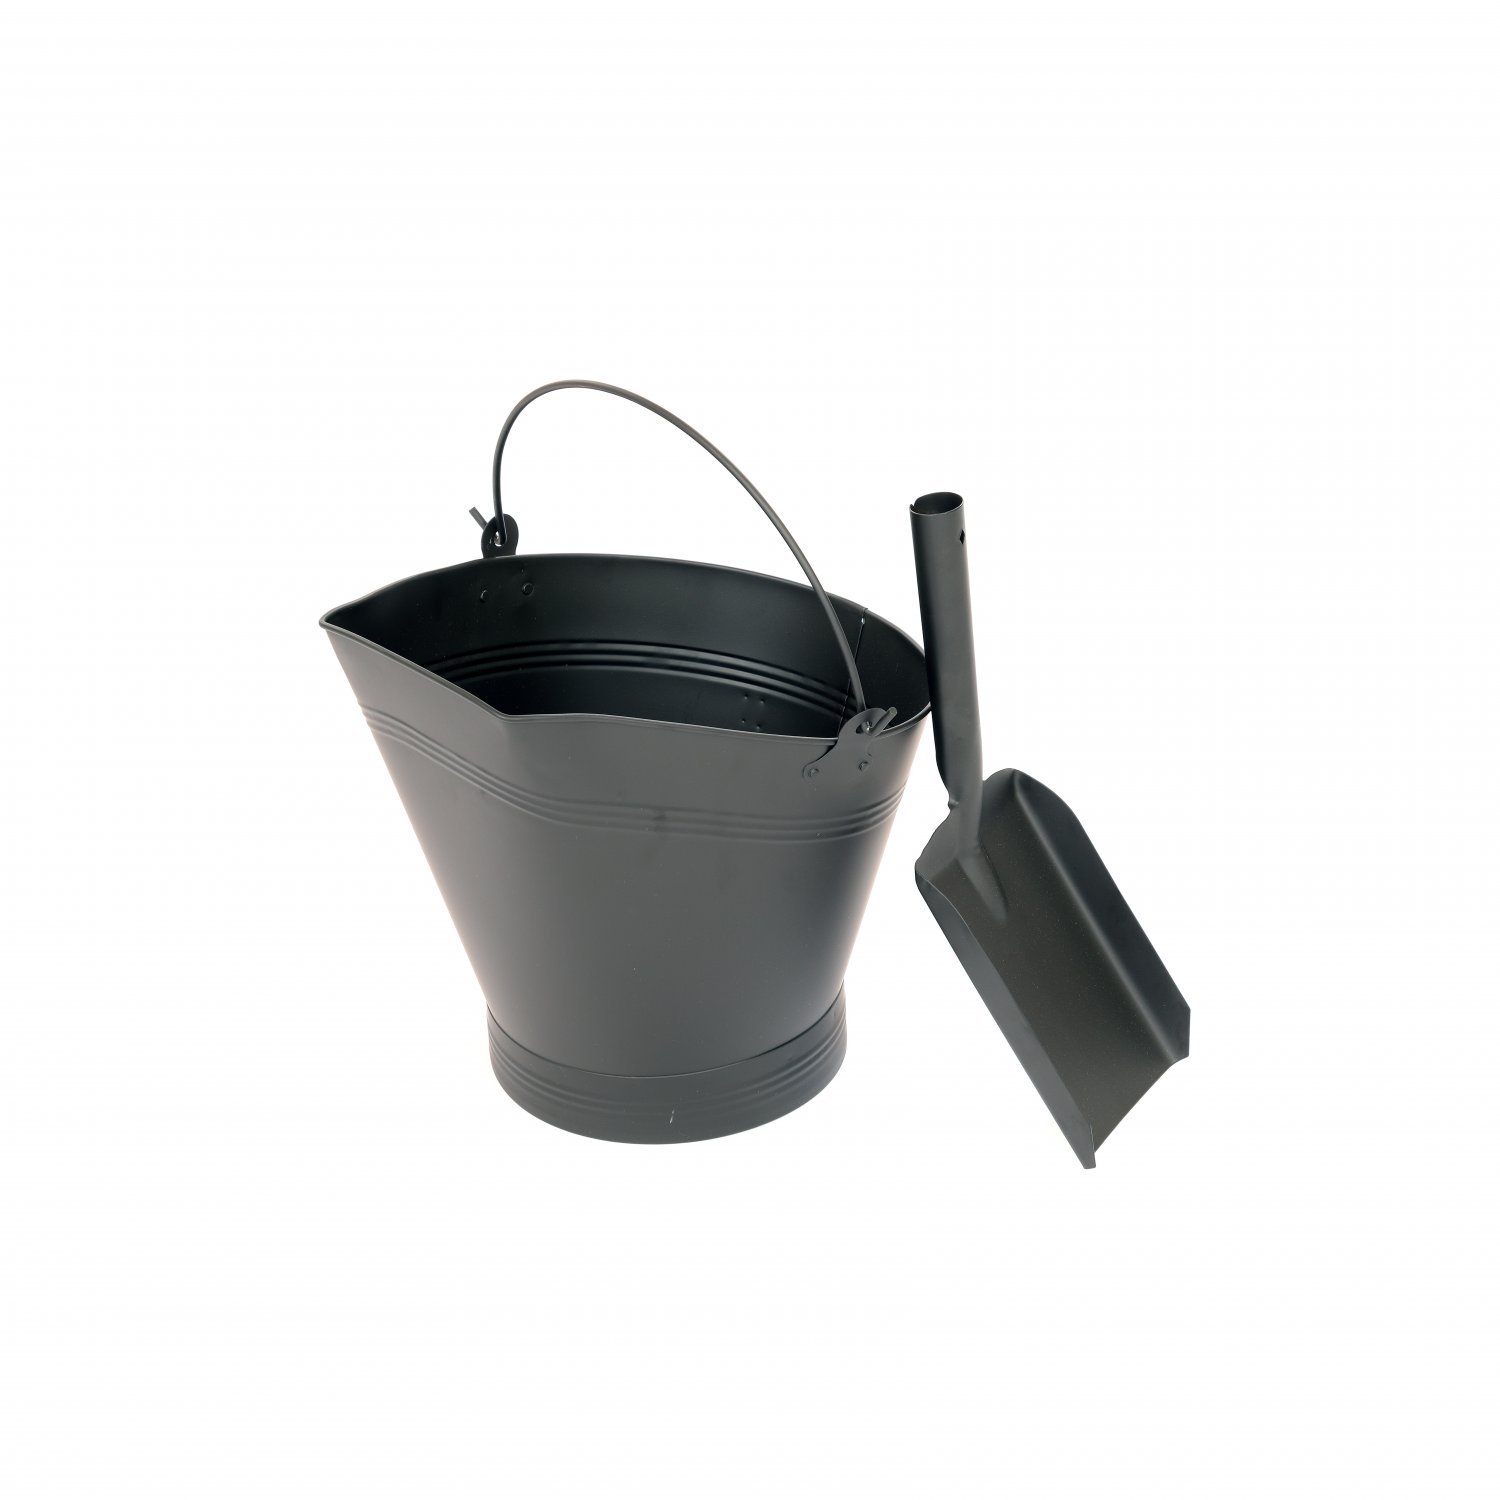 Parasene Heavy Duty Anthracite 23 Coal Hod Black Coal Hod Bucket Scuttle Black Bronze Galvanised High Quality for Fireplace Fire Side with Shovel and Poker 